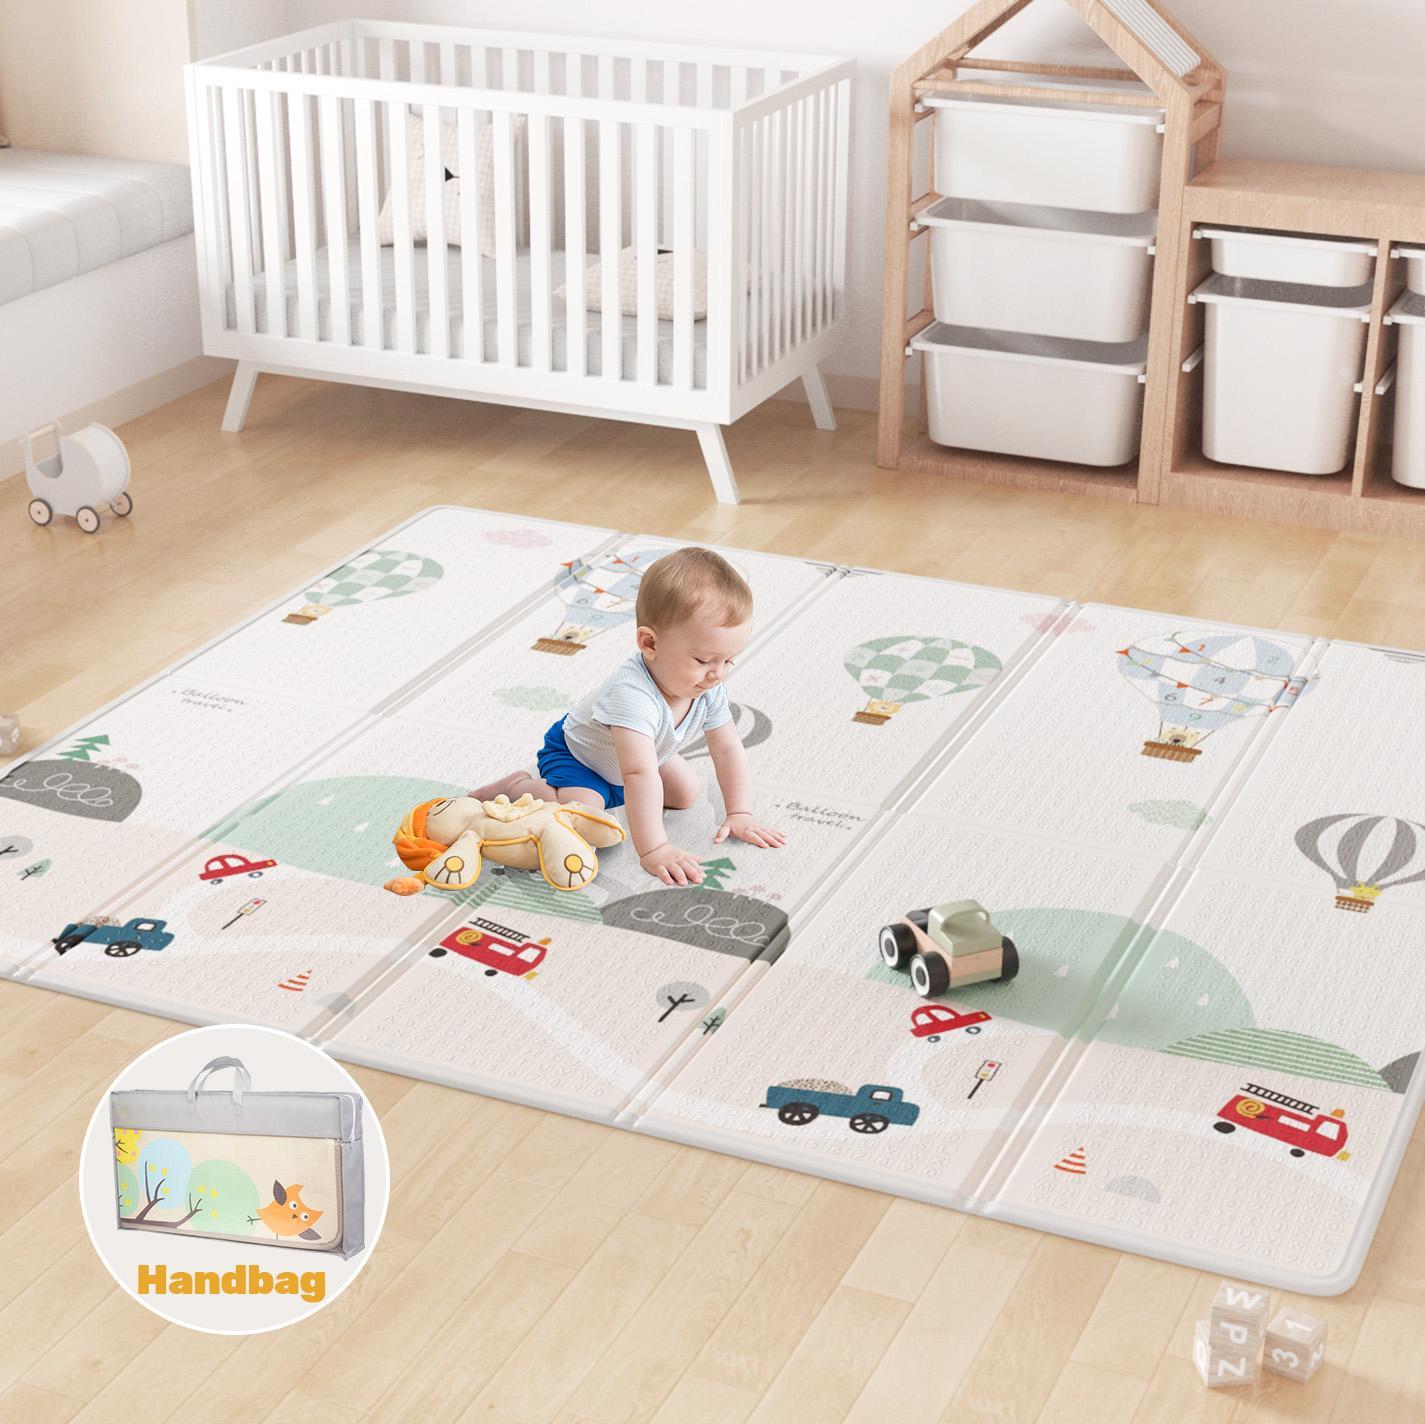 Advwin Foldable Baby Play Mat 150*200*1cm Extra Large Waterproof Activity Playmats Foam Crawling Mat with Travel Bag